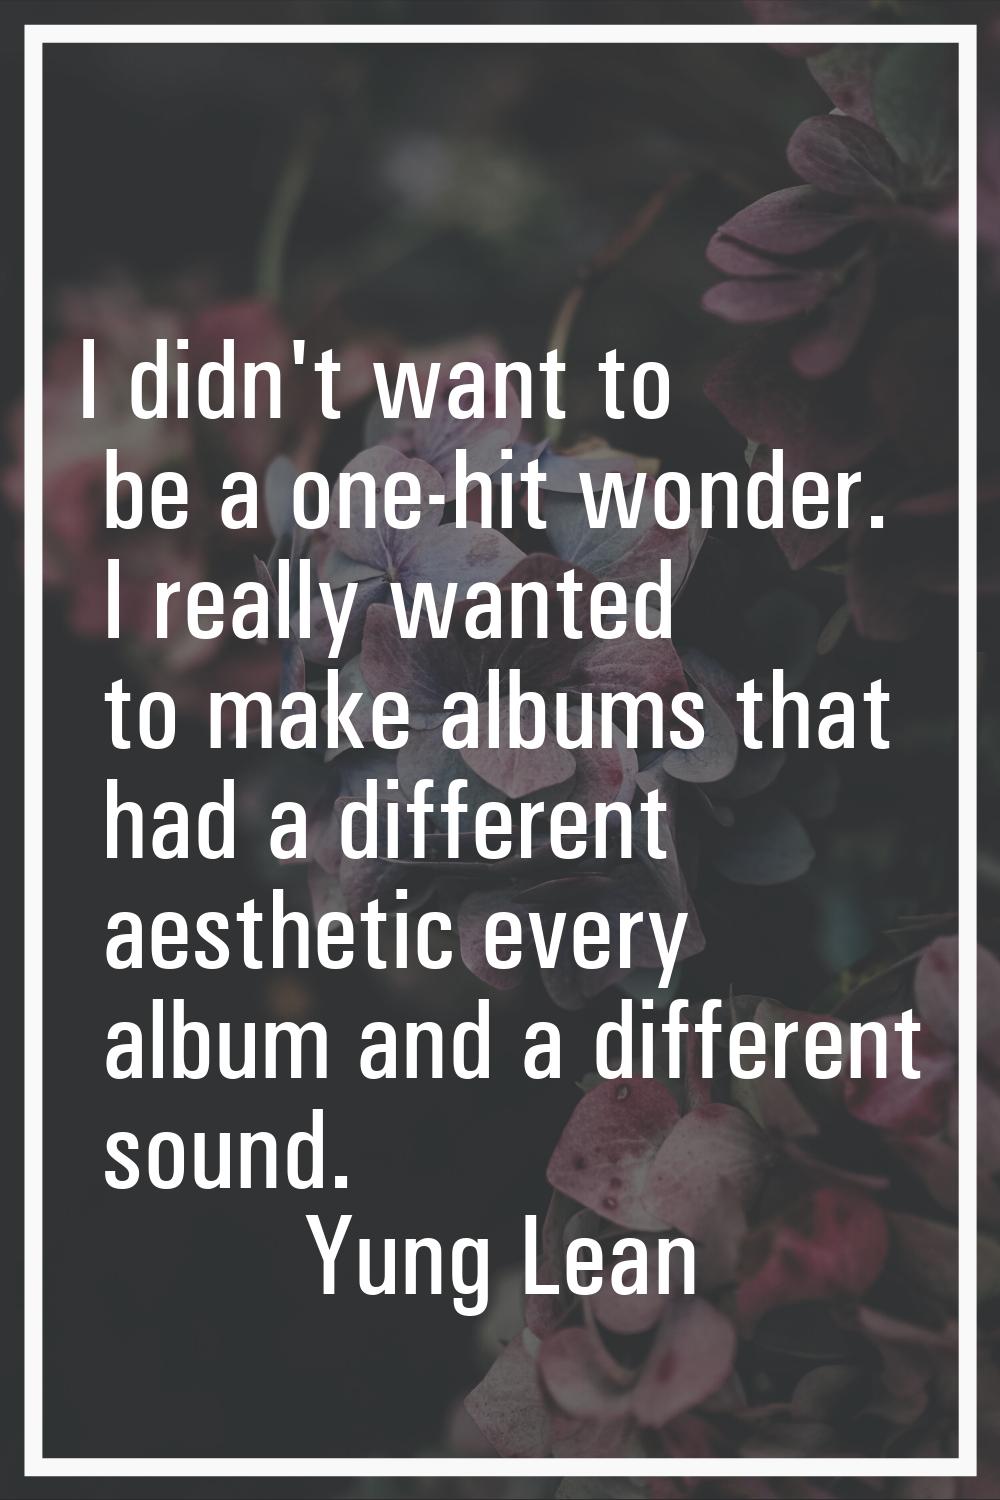 I didn't want to be a one-hit wonder. I really wanted to make albums that had a different aesthetic